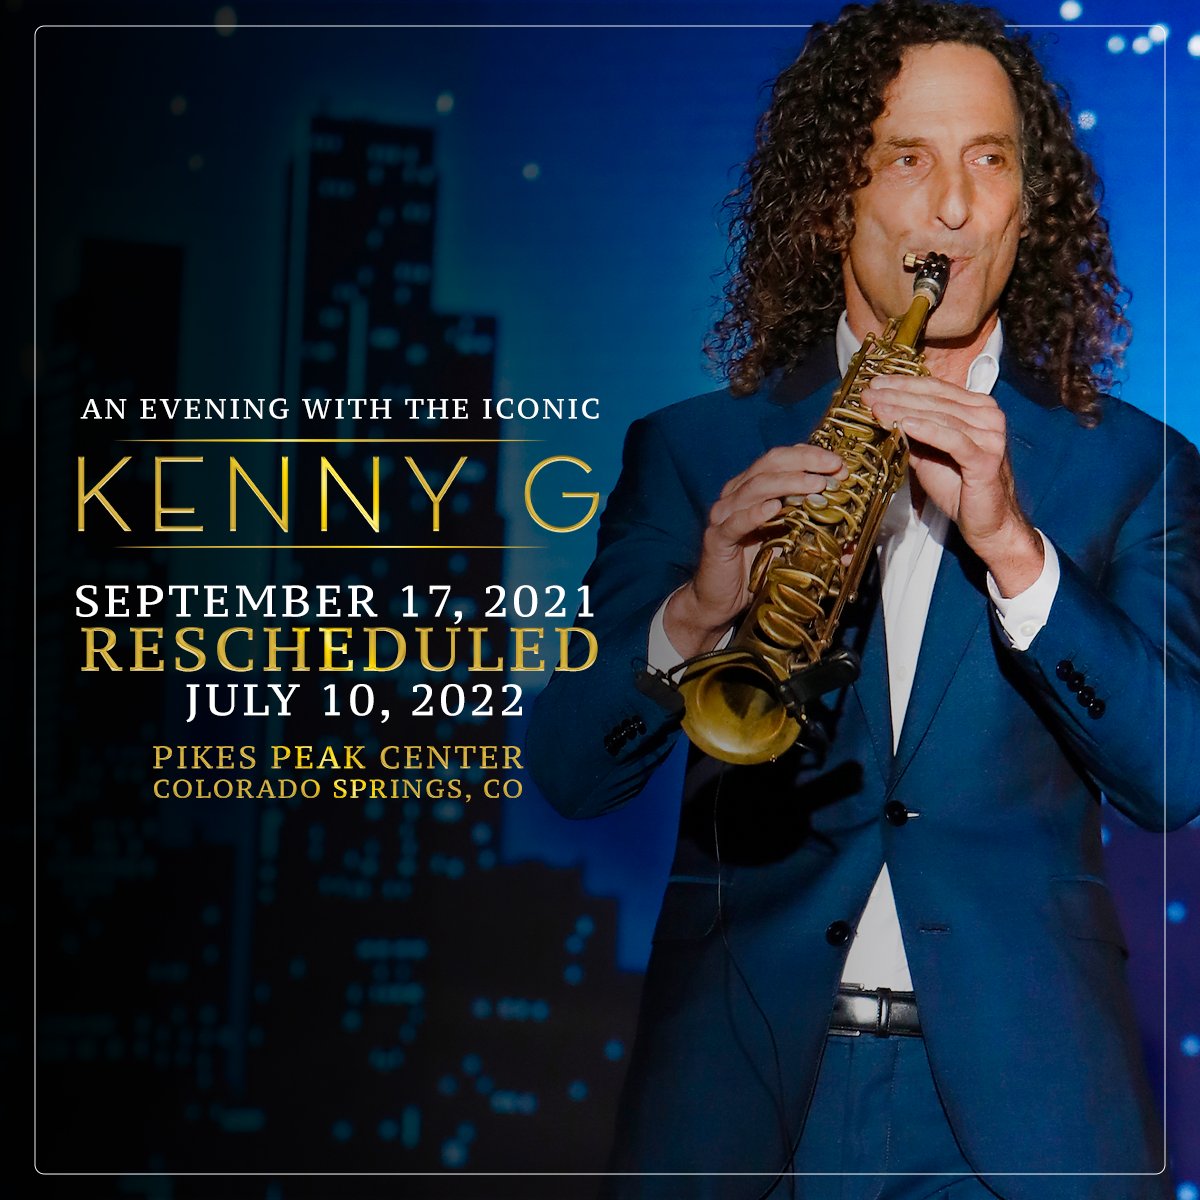 kenny g best song